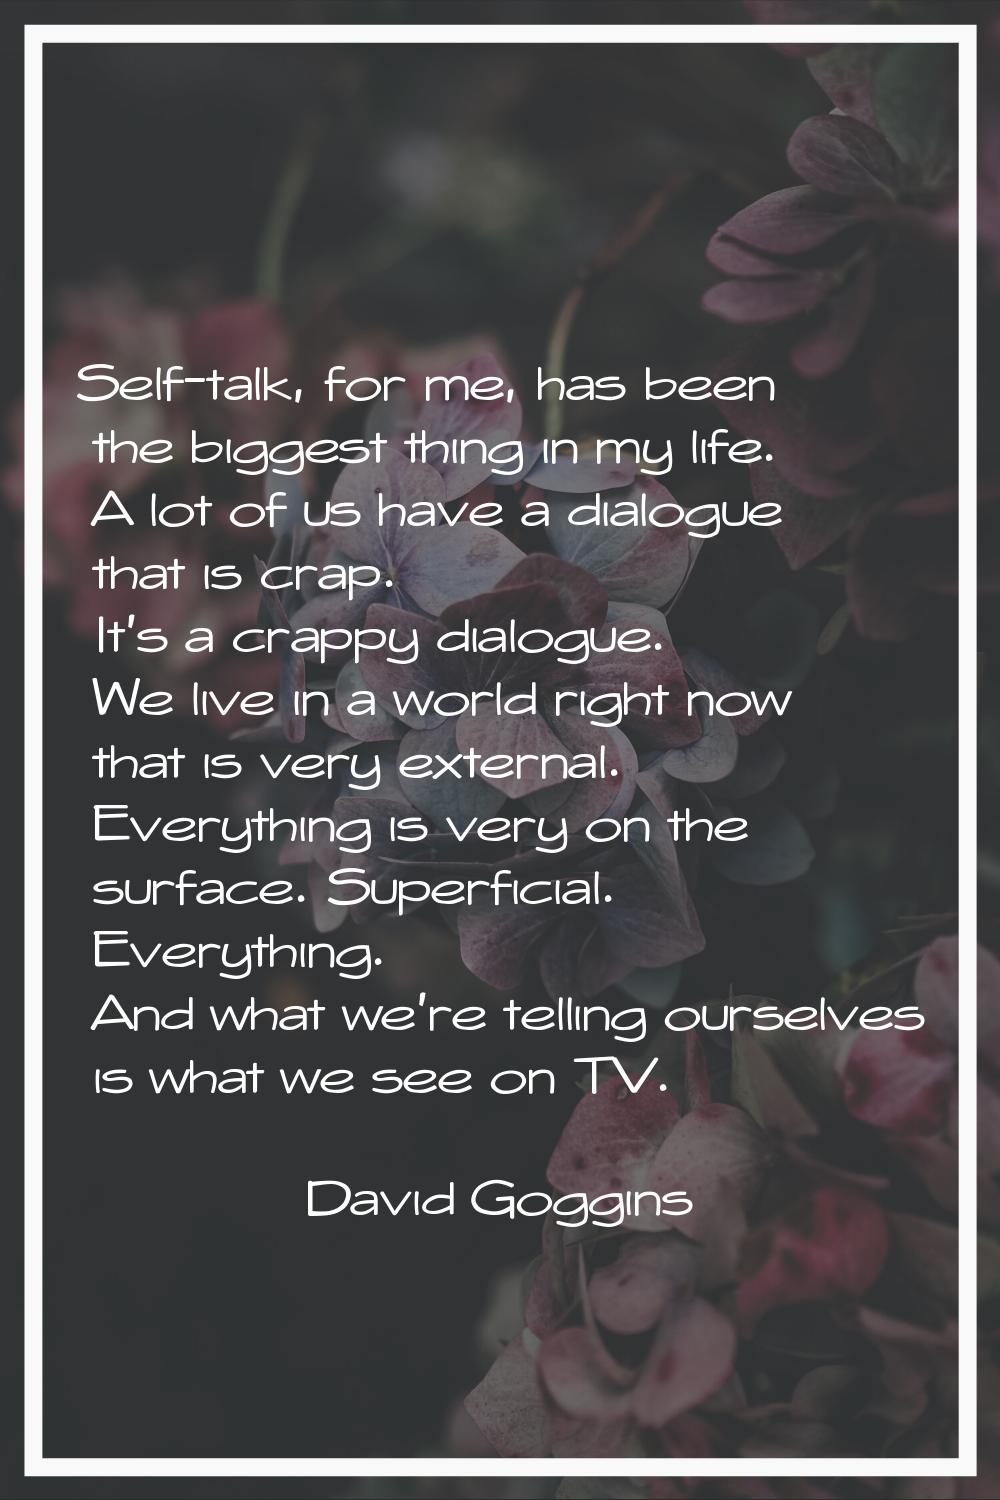 Self-talk, for me, has been the biggest thing in my life. A lot of us have a dialogue that is crap.